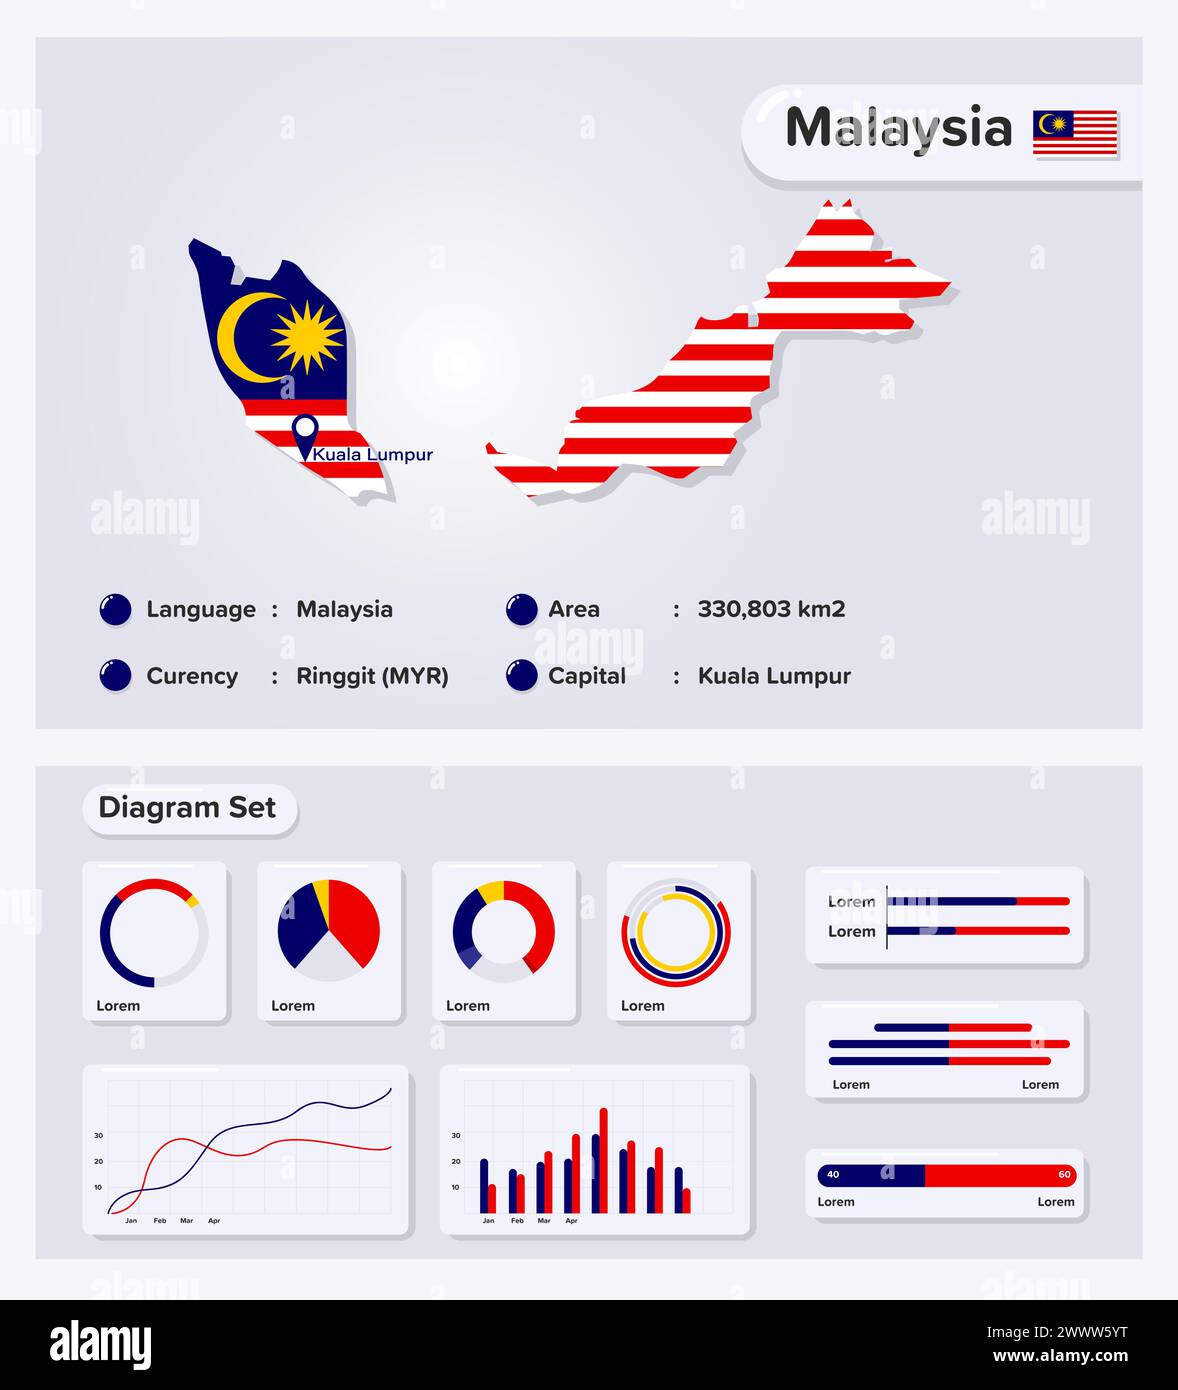 Malaysia Infographic Vector Illustration, Malaysia Statistical Data Element, Information Board With Flag Map, Malaysia Map Flag With Diagram Set Flat Stock Vector